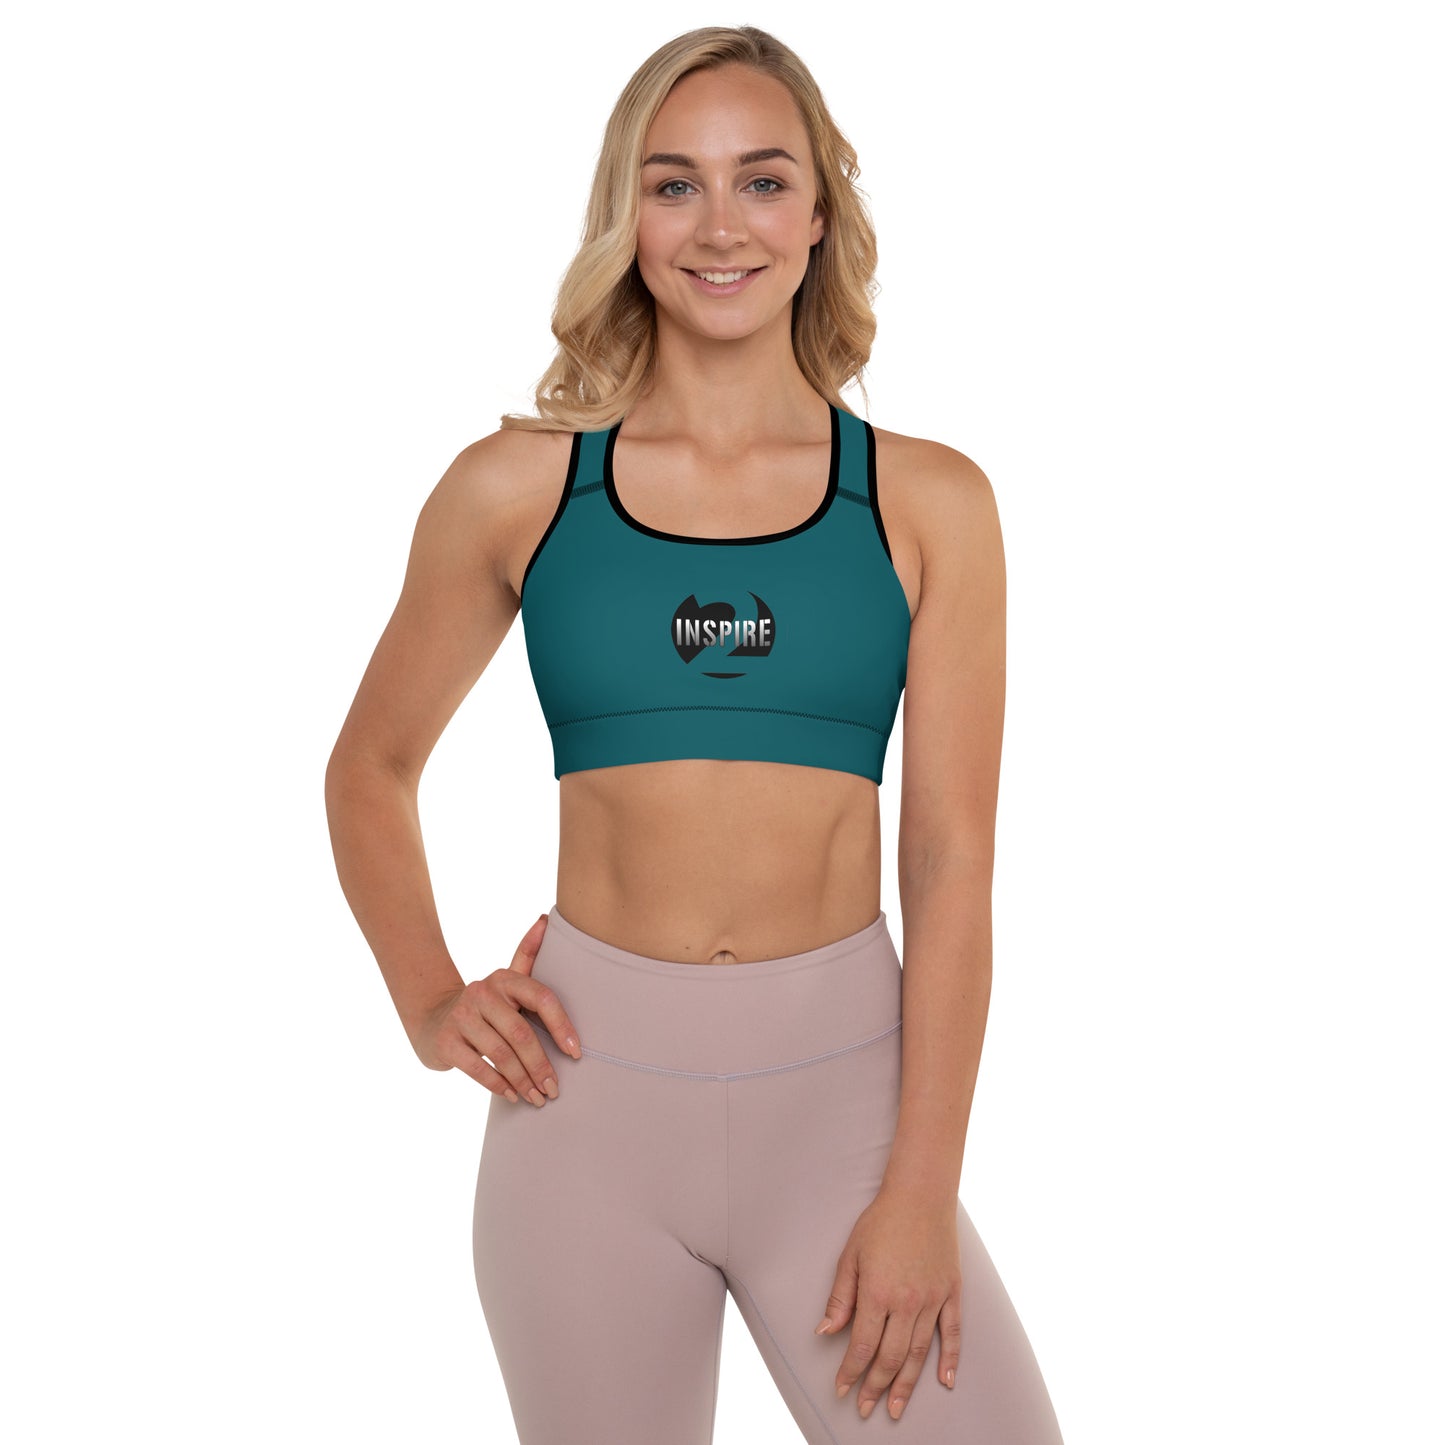 All-Over Print Padded Sports Bra